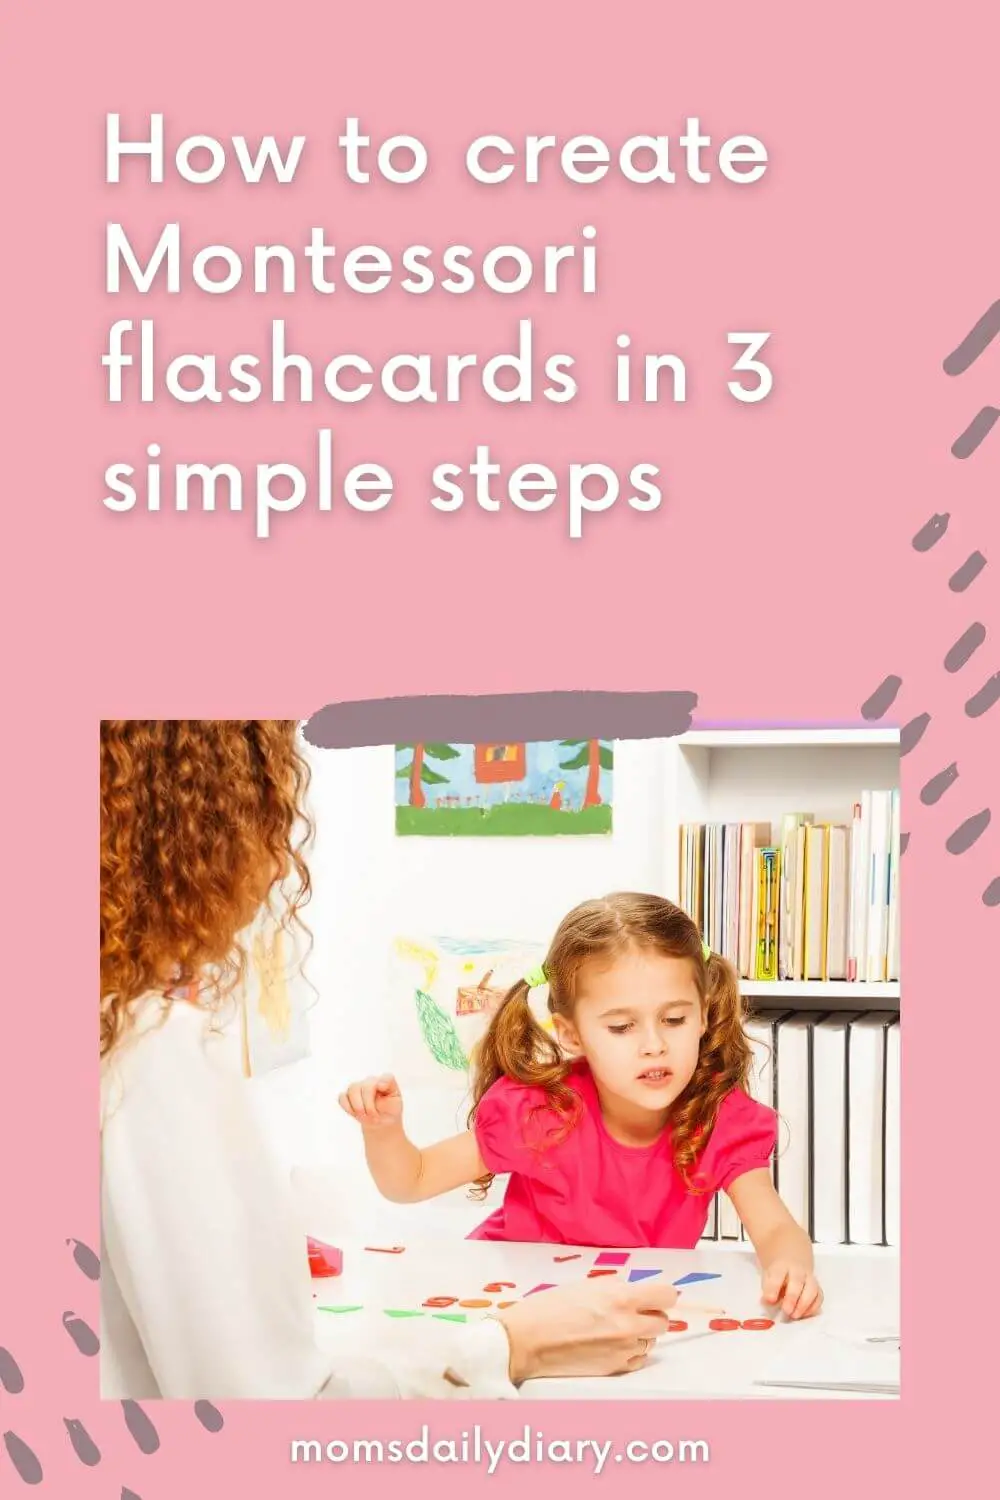 Creating Montessori flashcards at home is as simple as 1-2-3. Literally! Here is your quick guide that can save you hundreds.